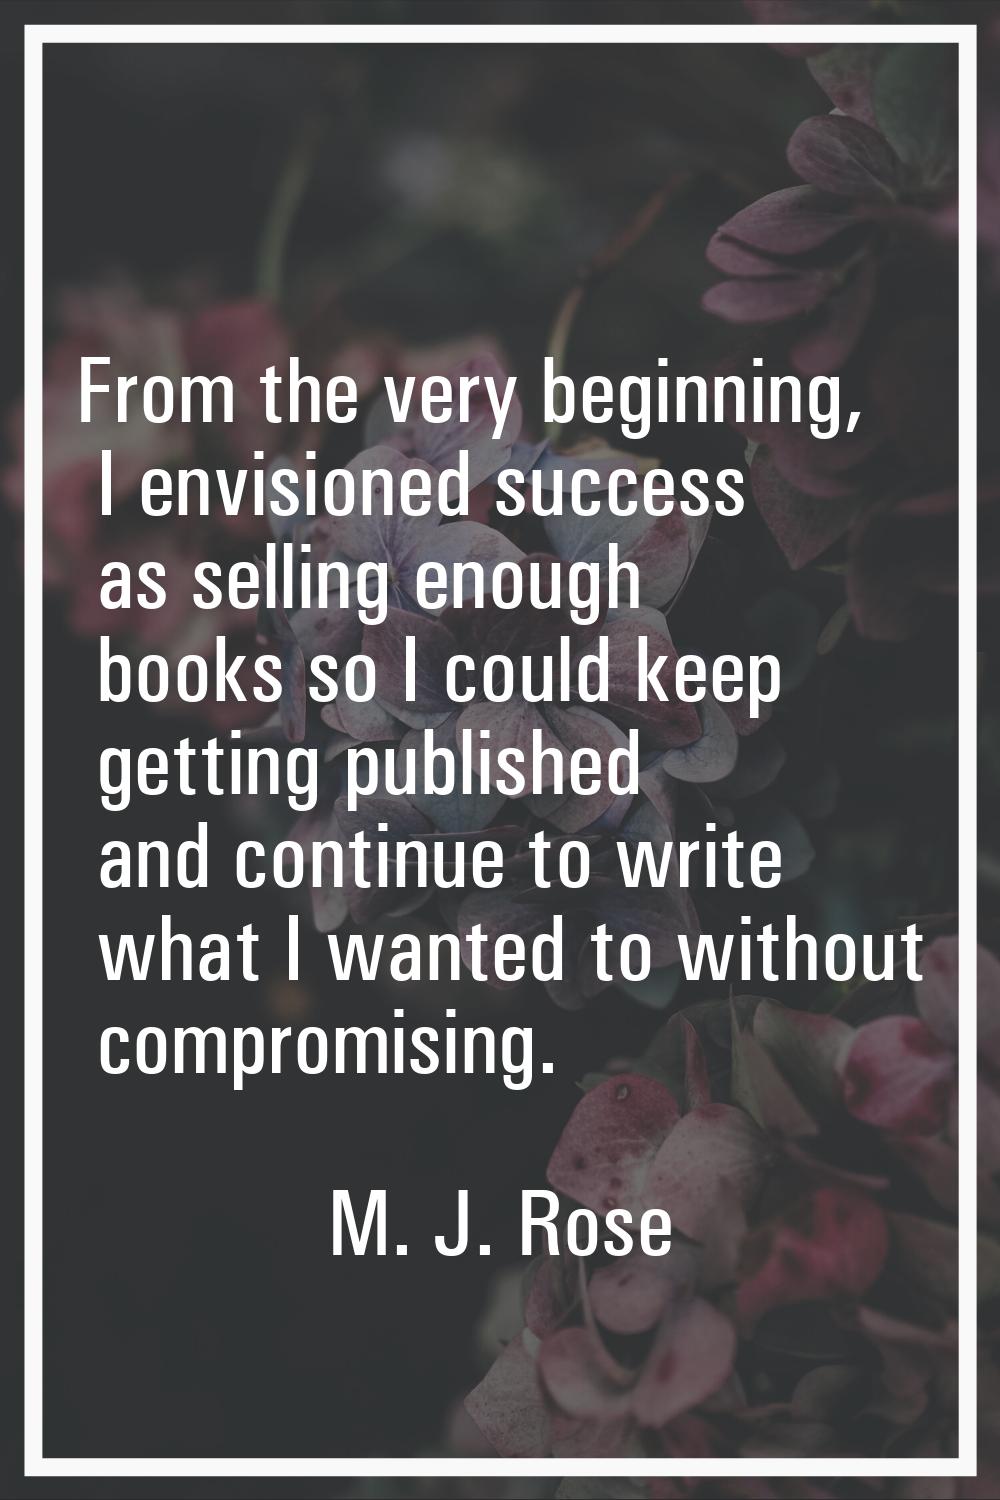 From the very beginning, I envisioned success as selling enough books so I could keep getting publi